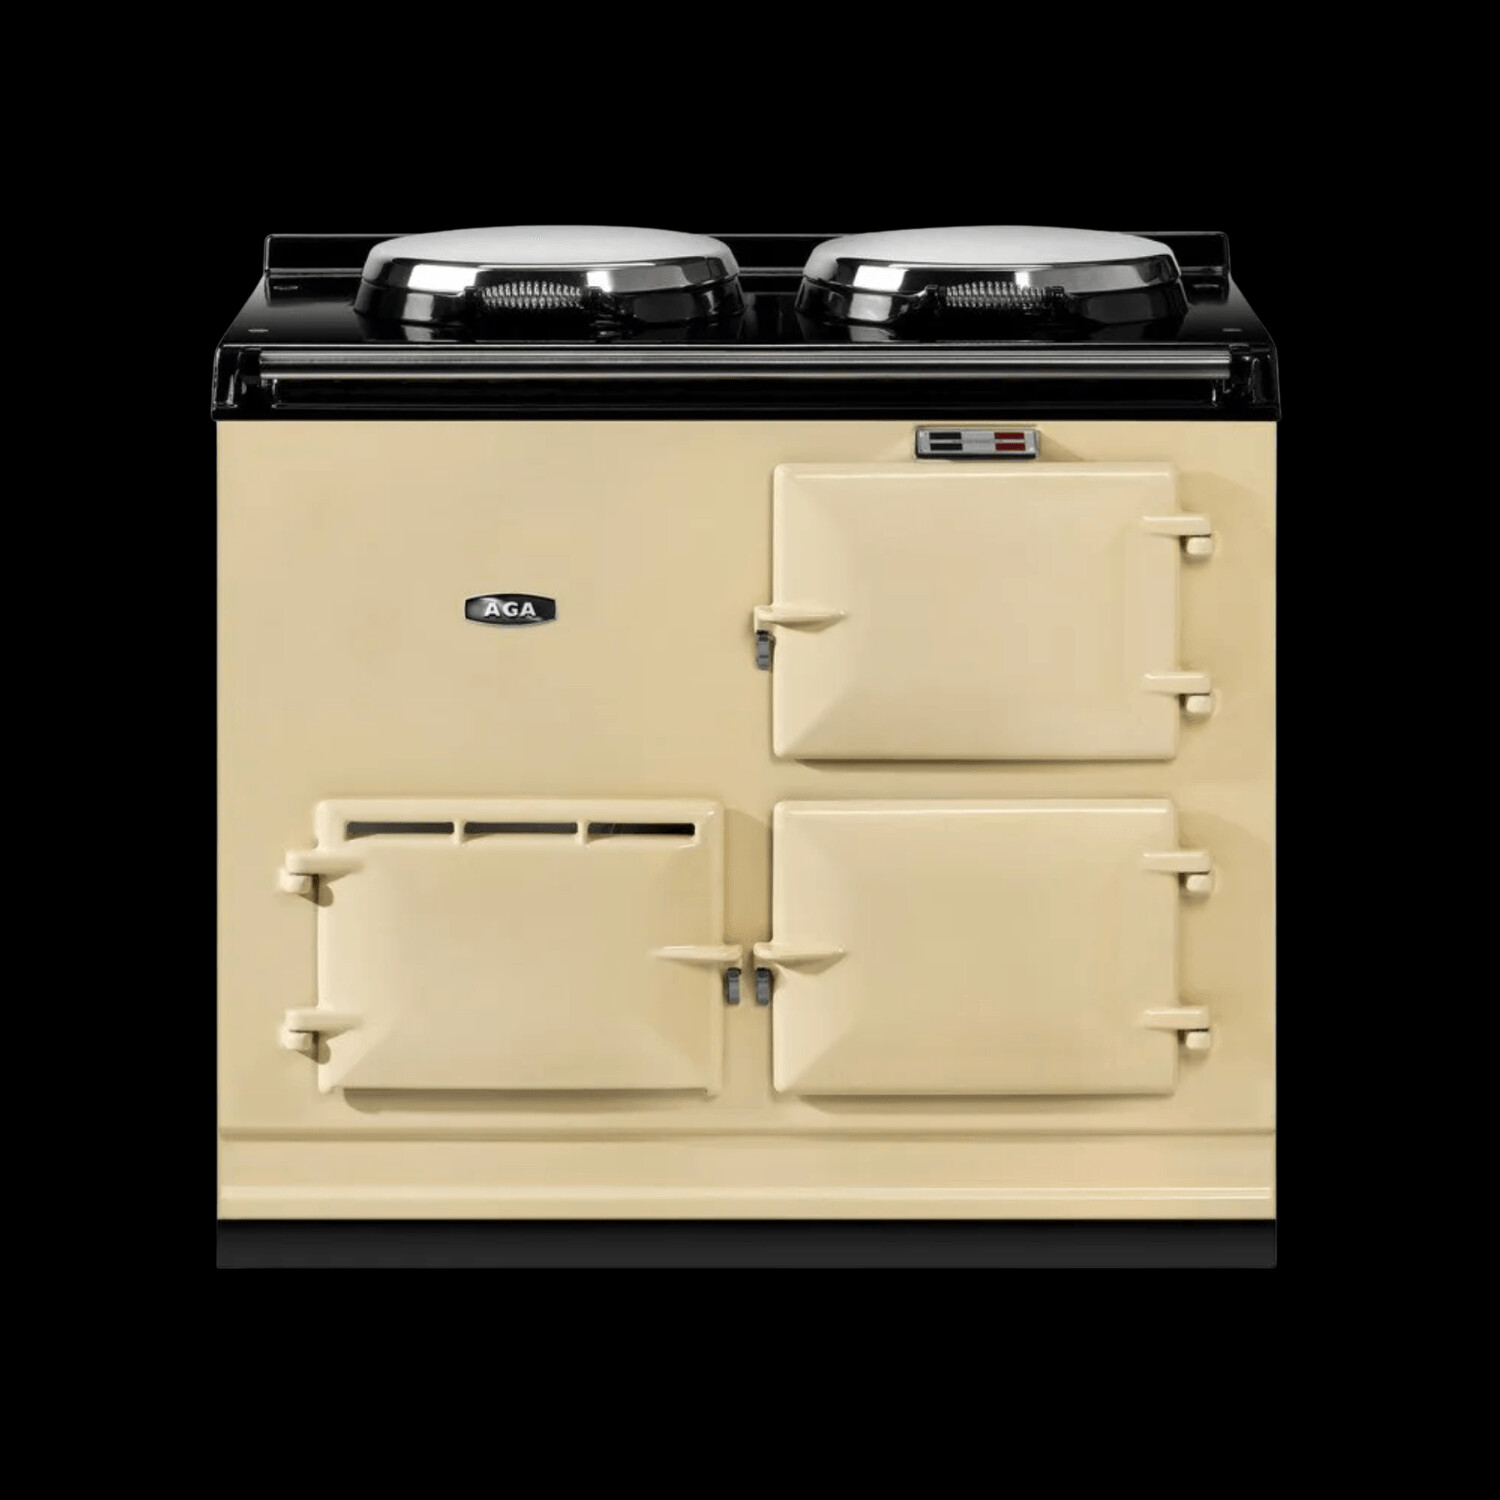 Reconditioned 2 Oven eControl Aga Cooker (Any Colour)